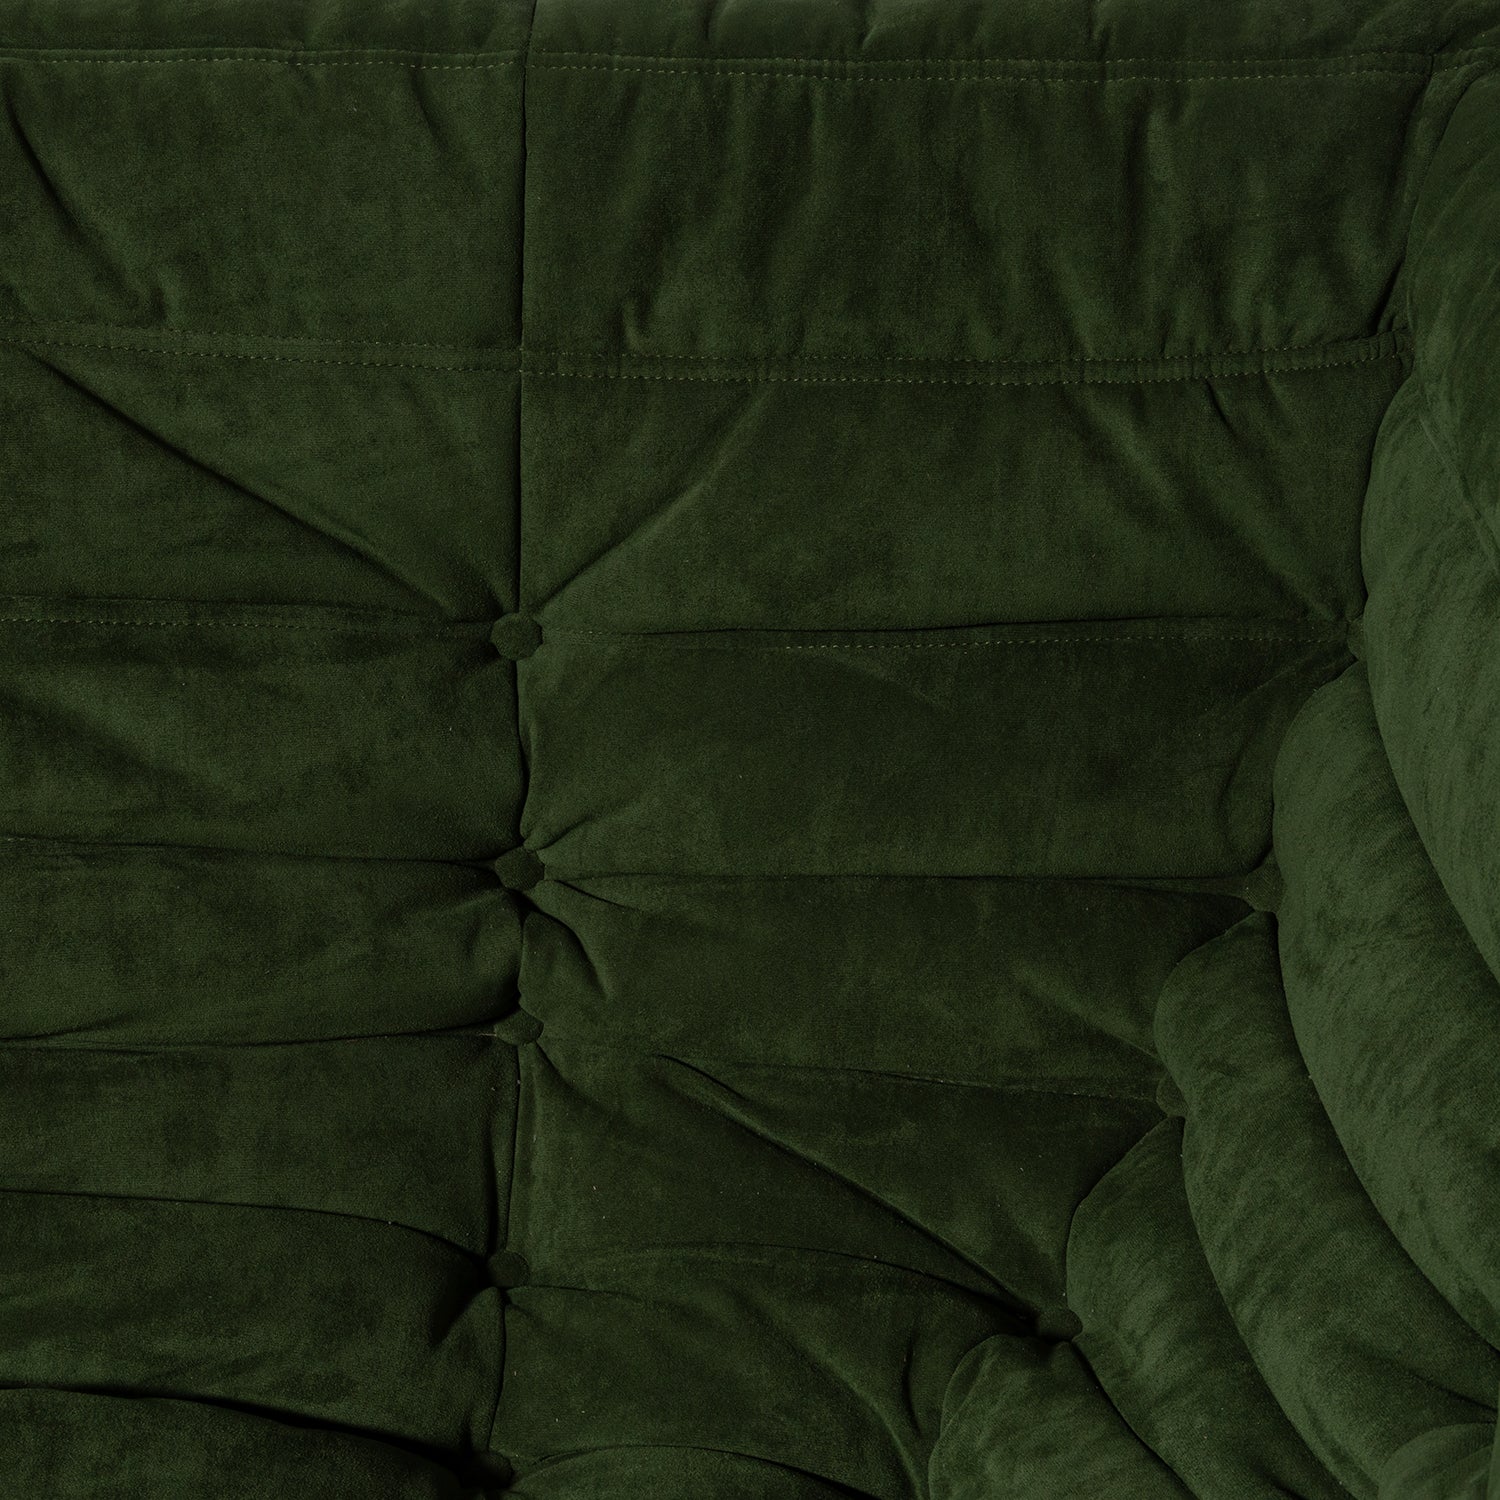 Togo Style Sofa Green Suede